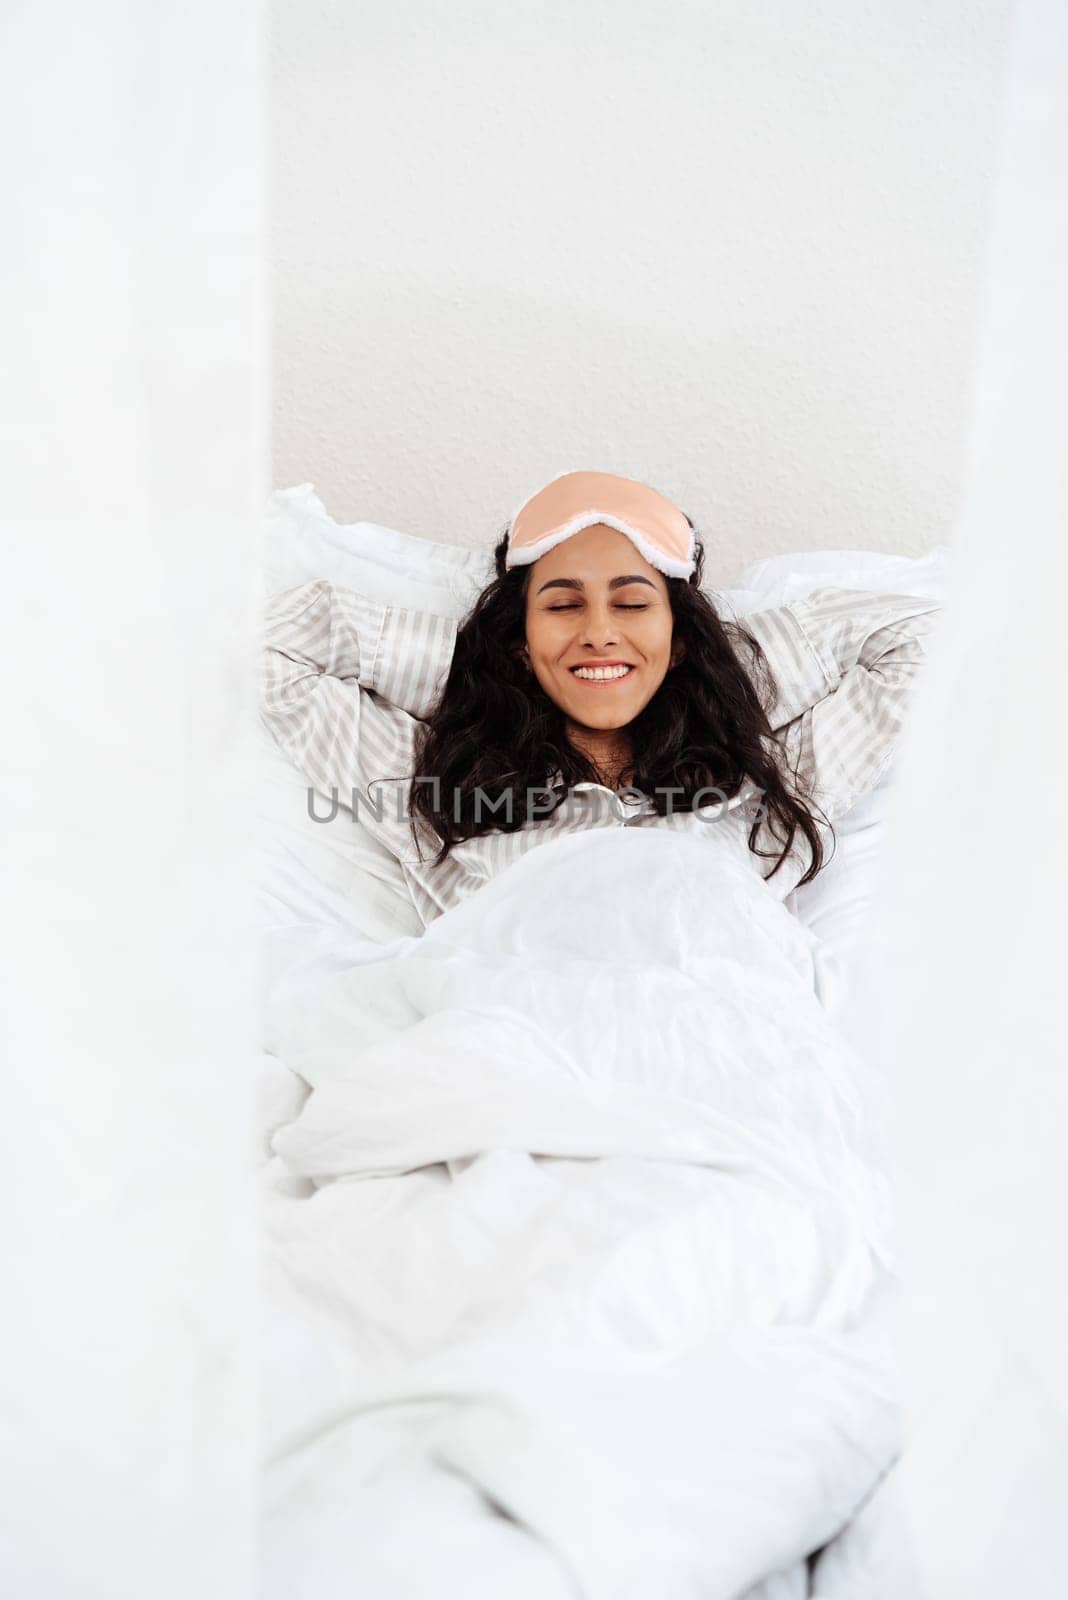 Healthy sound sleep of a girl on the weekend. The joy of starting a vacation by SistersStock